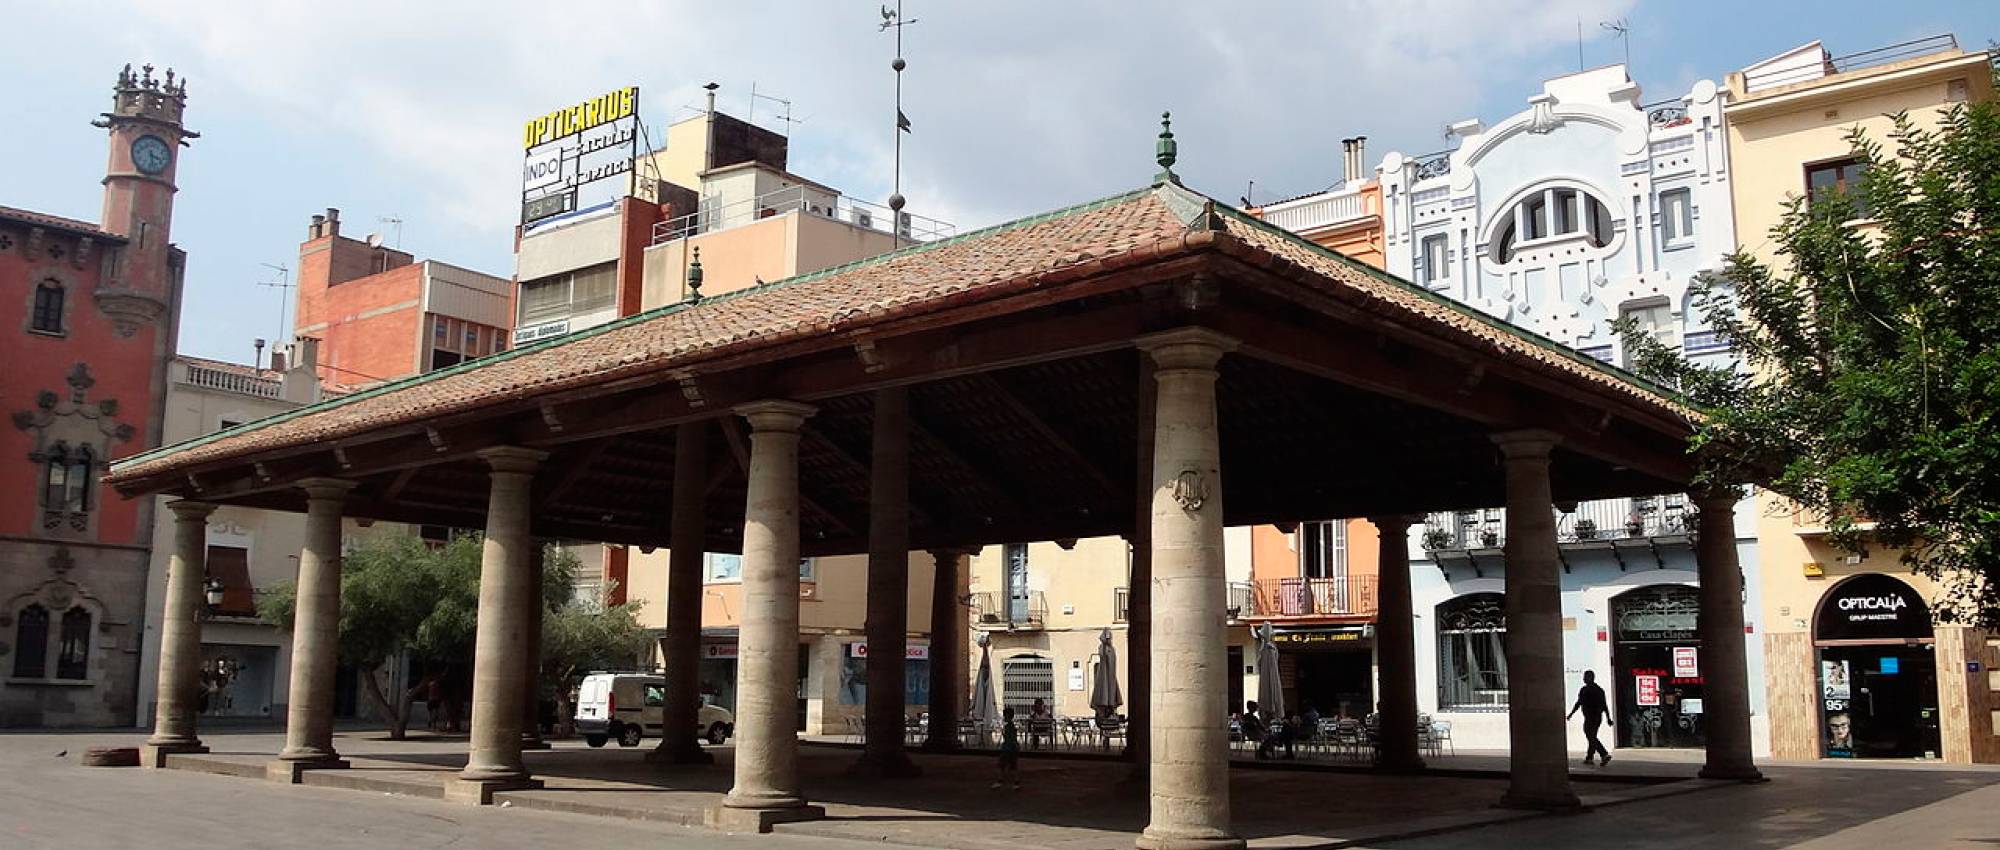 Covered market of Granollers. CC BY-SA 3.0 - Mhocalc / Wikimedia Commons